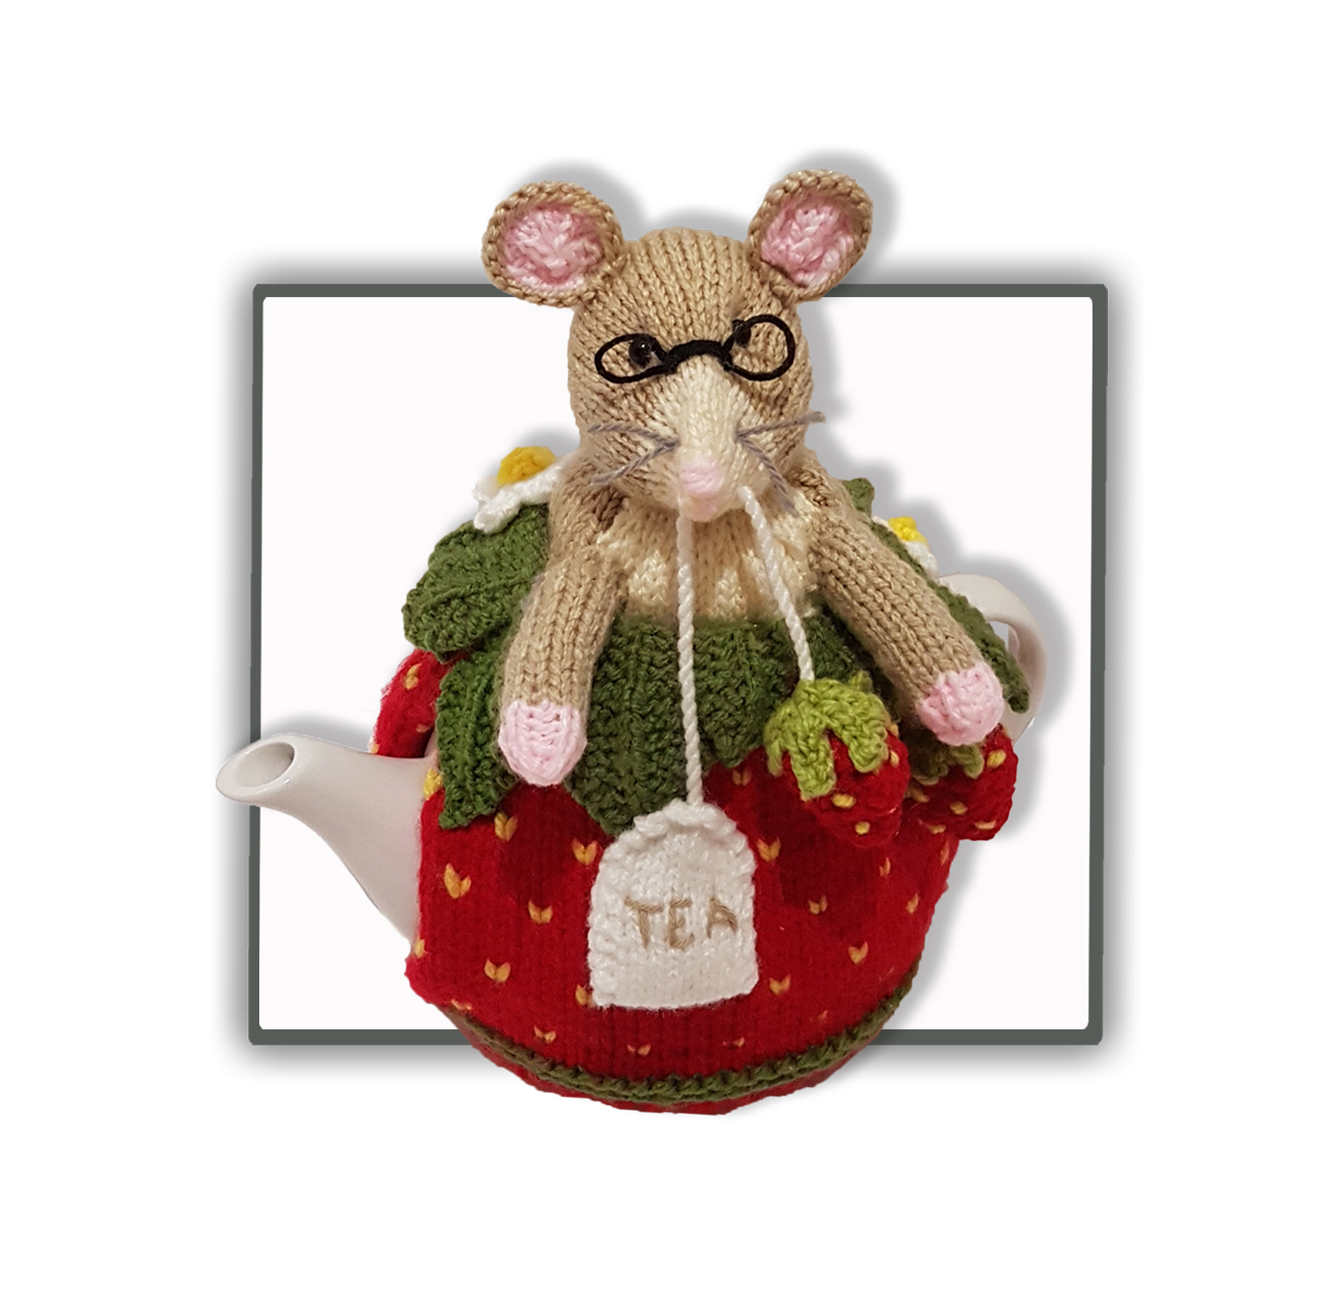 Tea Cosy Knitting Patterns Easy Strawberry Dormouse Tea Cosy Pdf Knitting Pattern